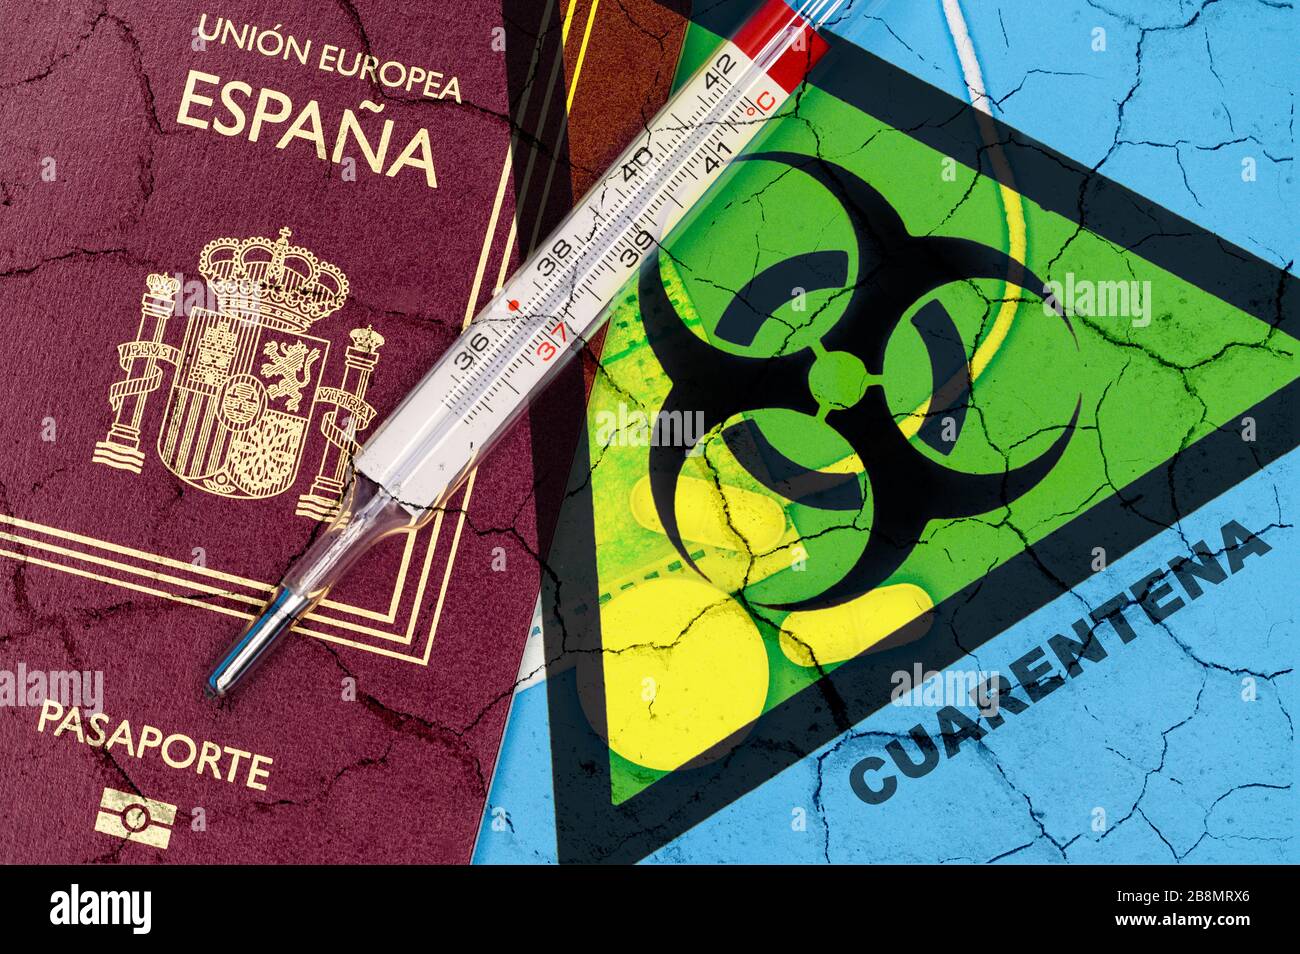 Spain travel restriction. Cancel the planned trip to Spain or restriction to Spanish travelers concept due to the spread of coronavirus infection. Quarantine for the covid-19 pandemic . Stock Photo